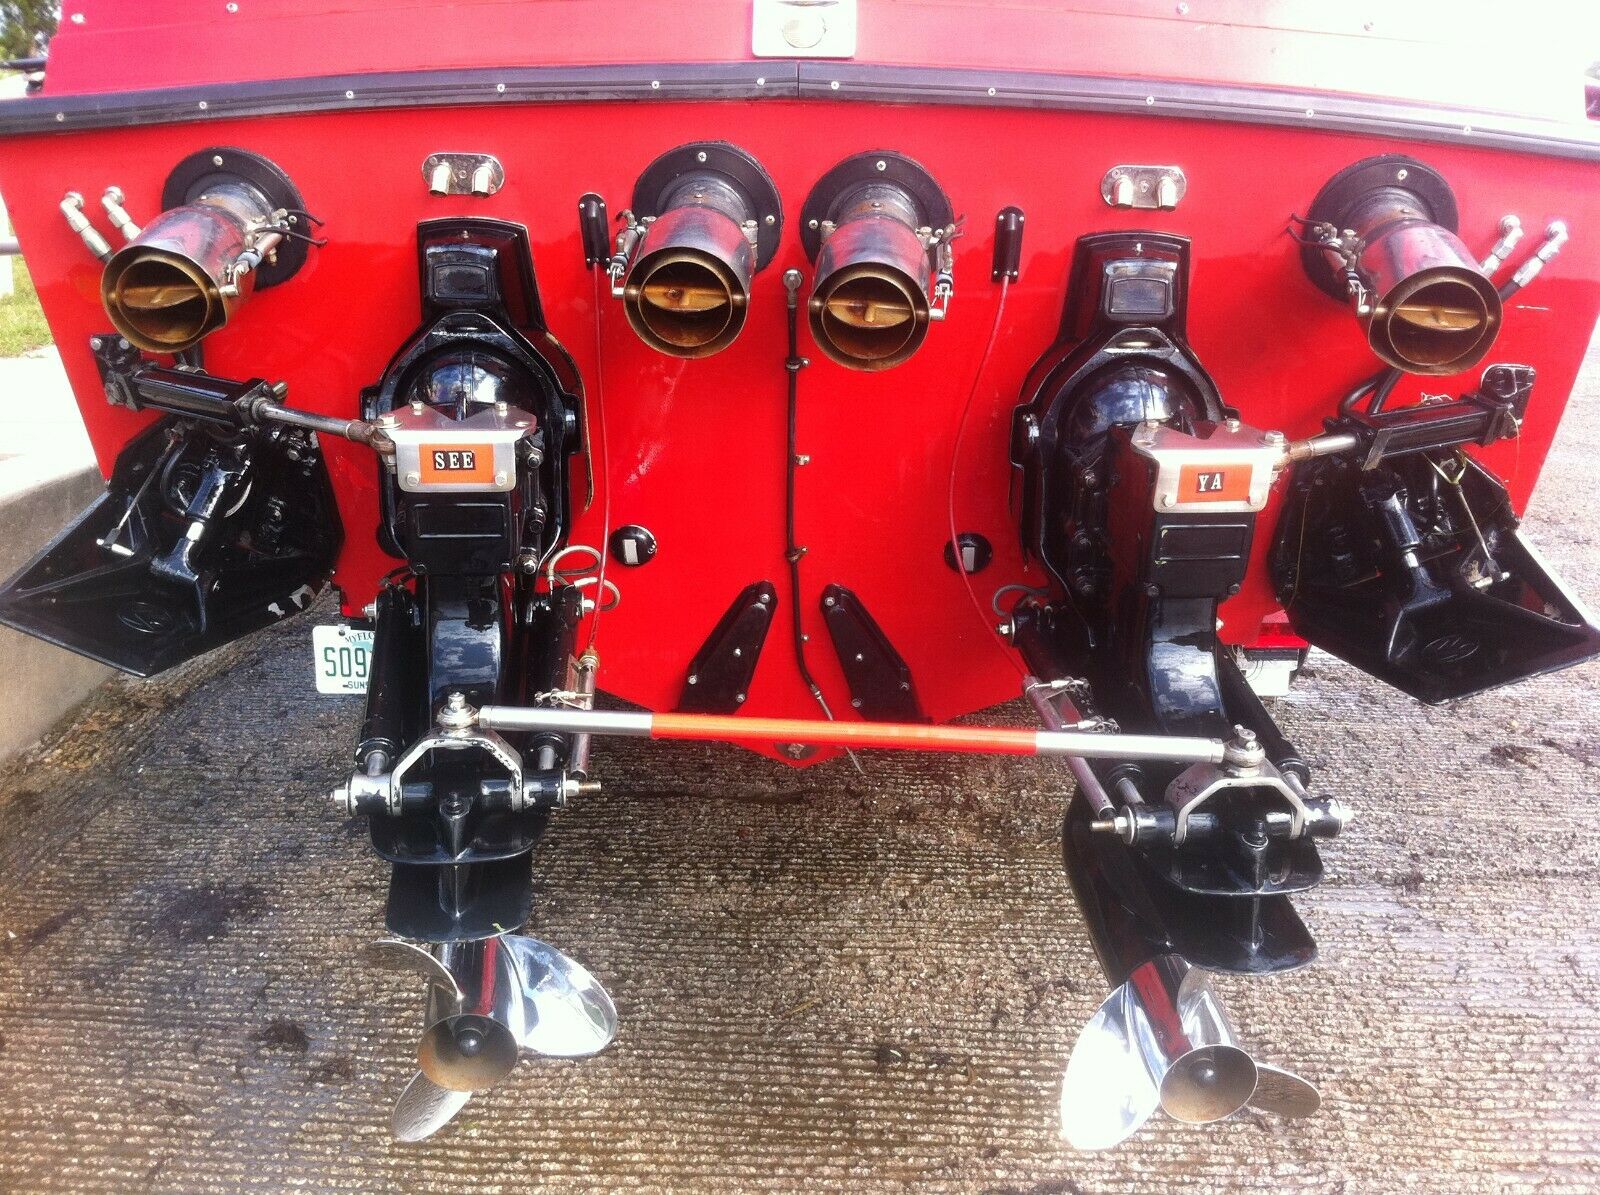 Cigarette Awesome 1975 for sale for $6,500 - Boats-from ...